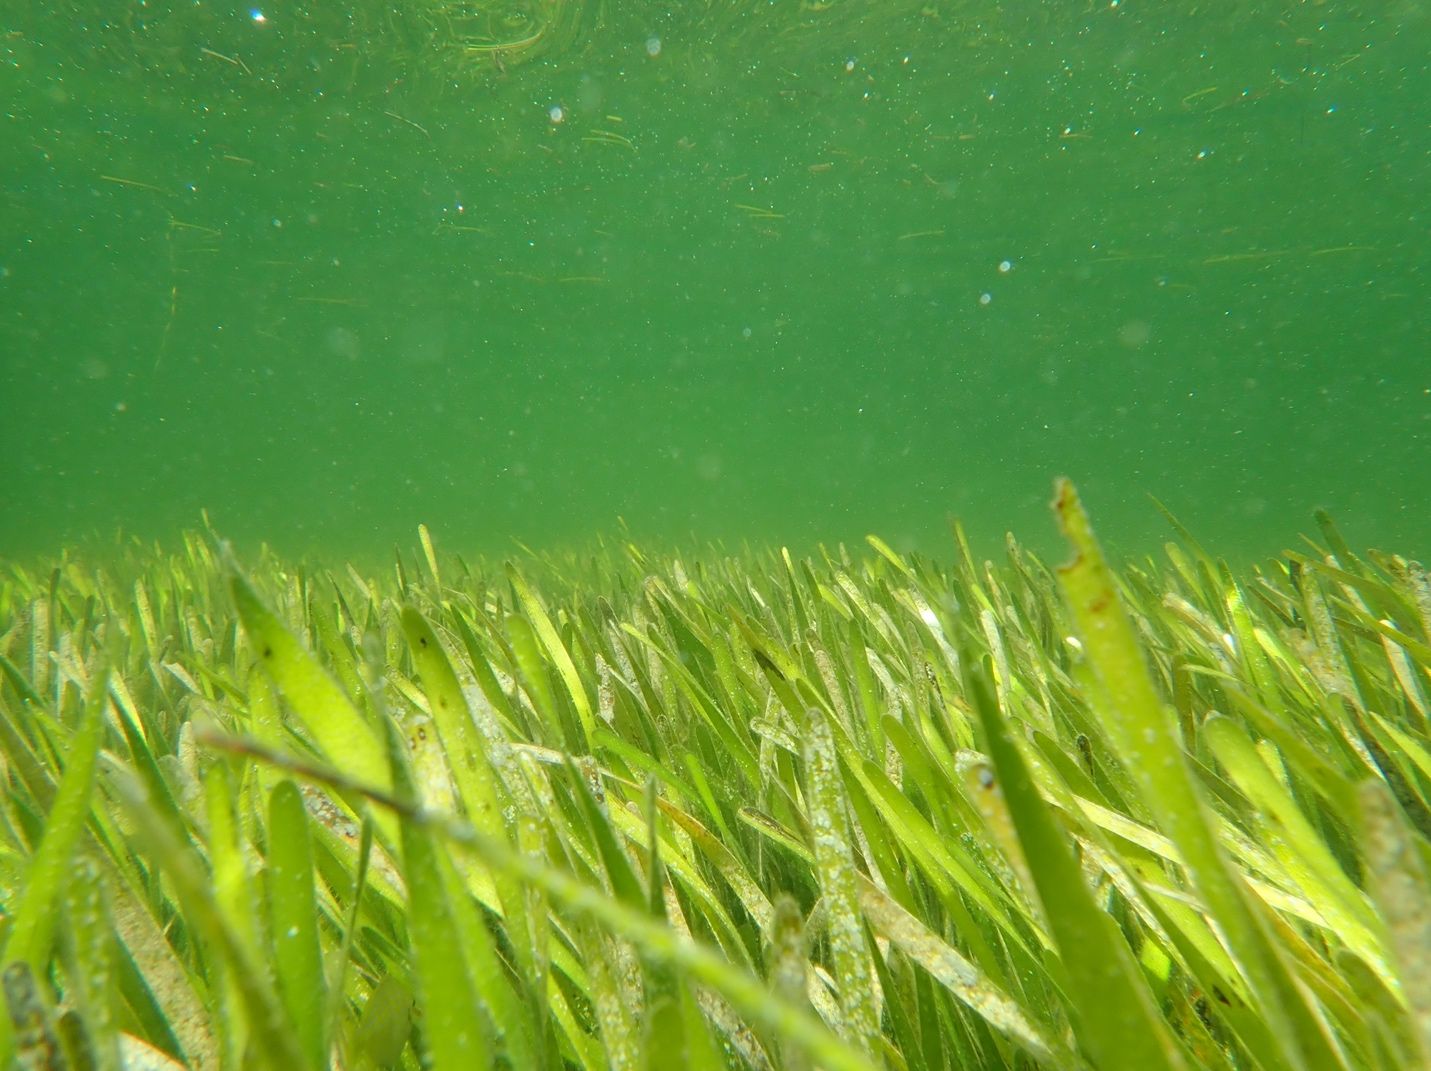 Photograph of healthy beds of seagrass.